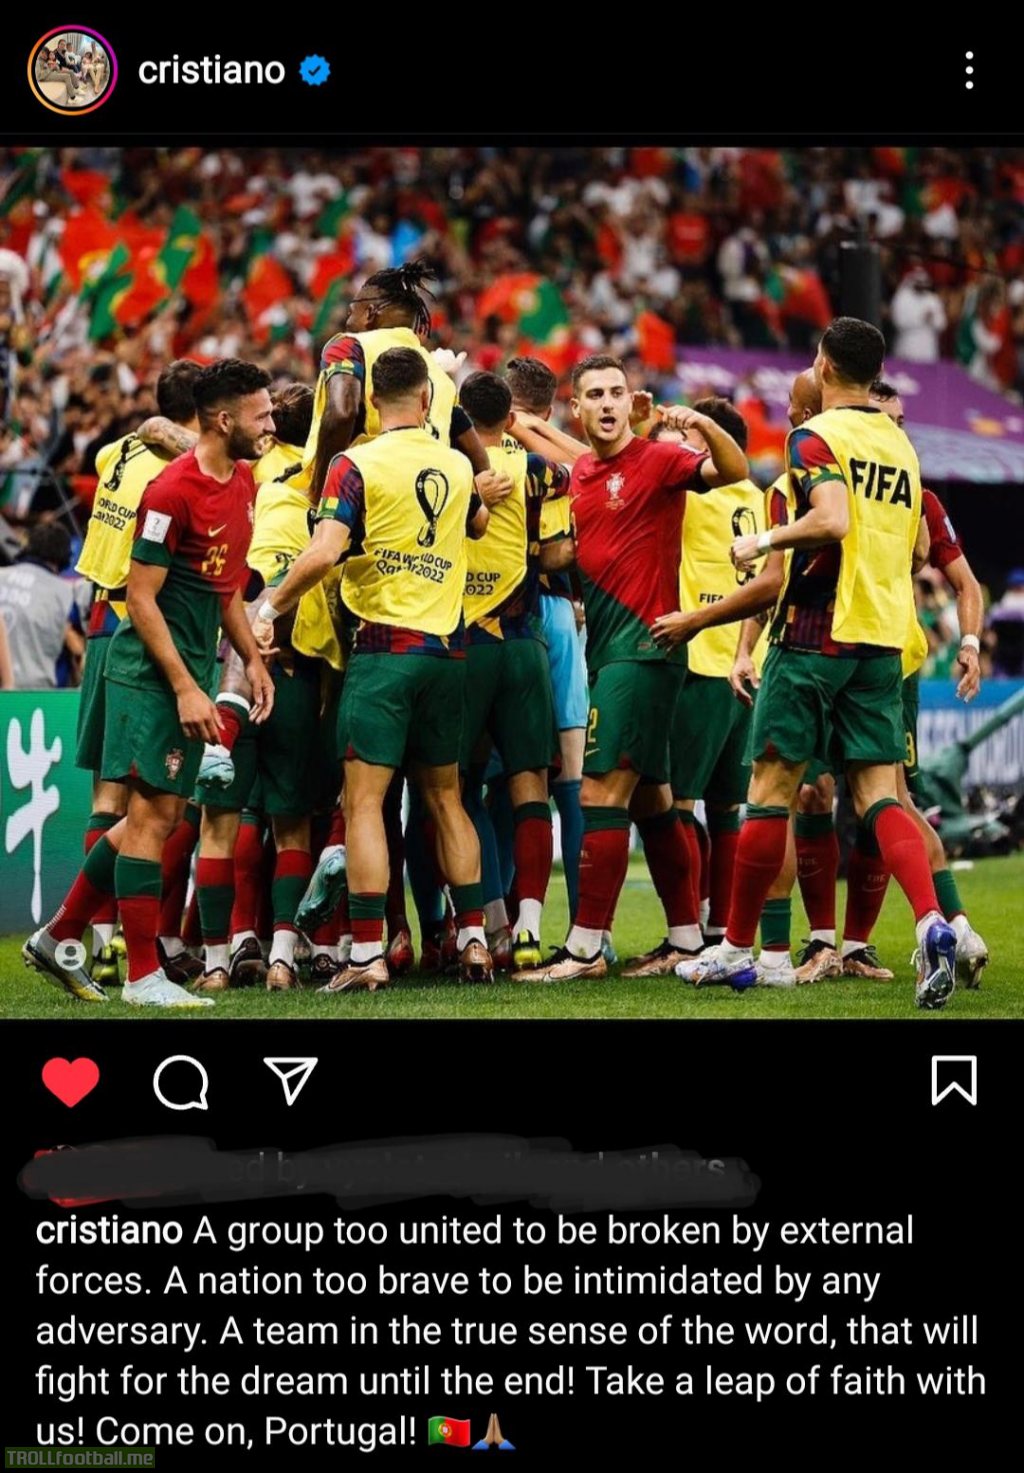 CR7 on Instagram, "A group too united to be broken by external forces", after being accused of threatening to leave the World Cup due to his benching vs. Switzerland